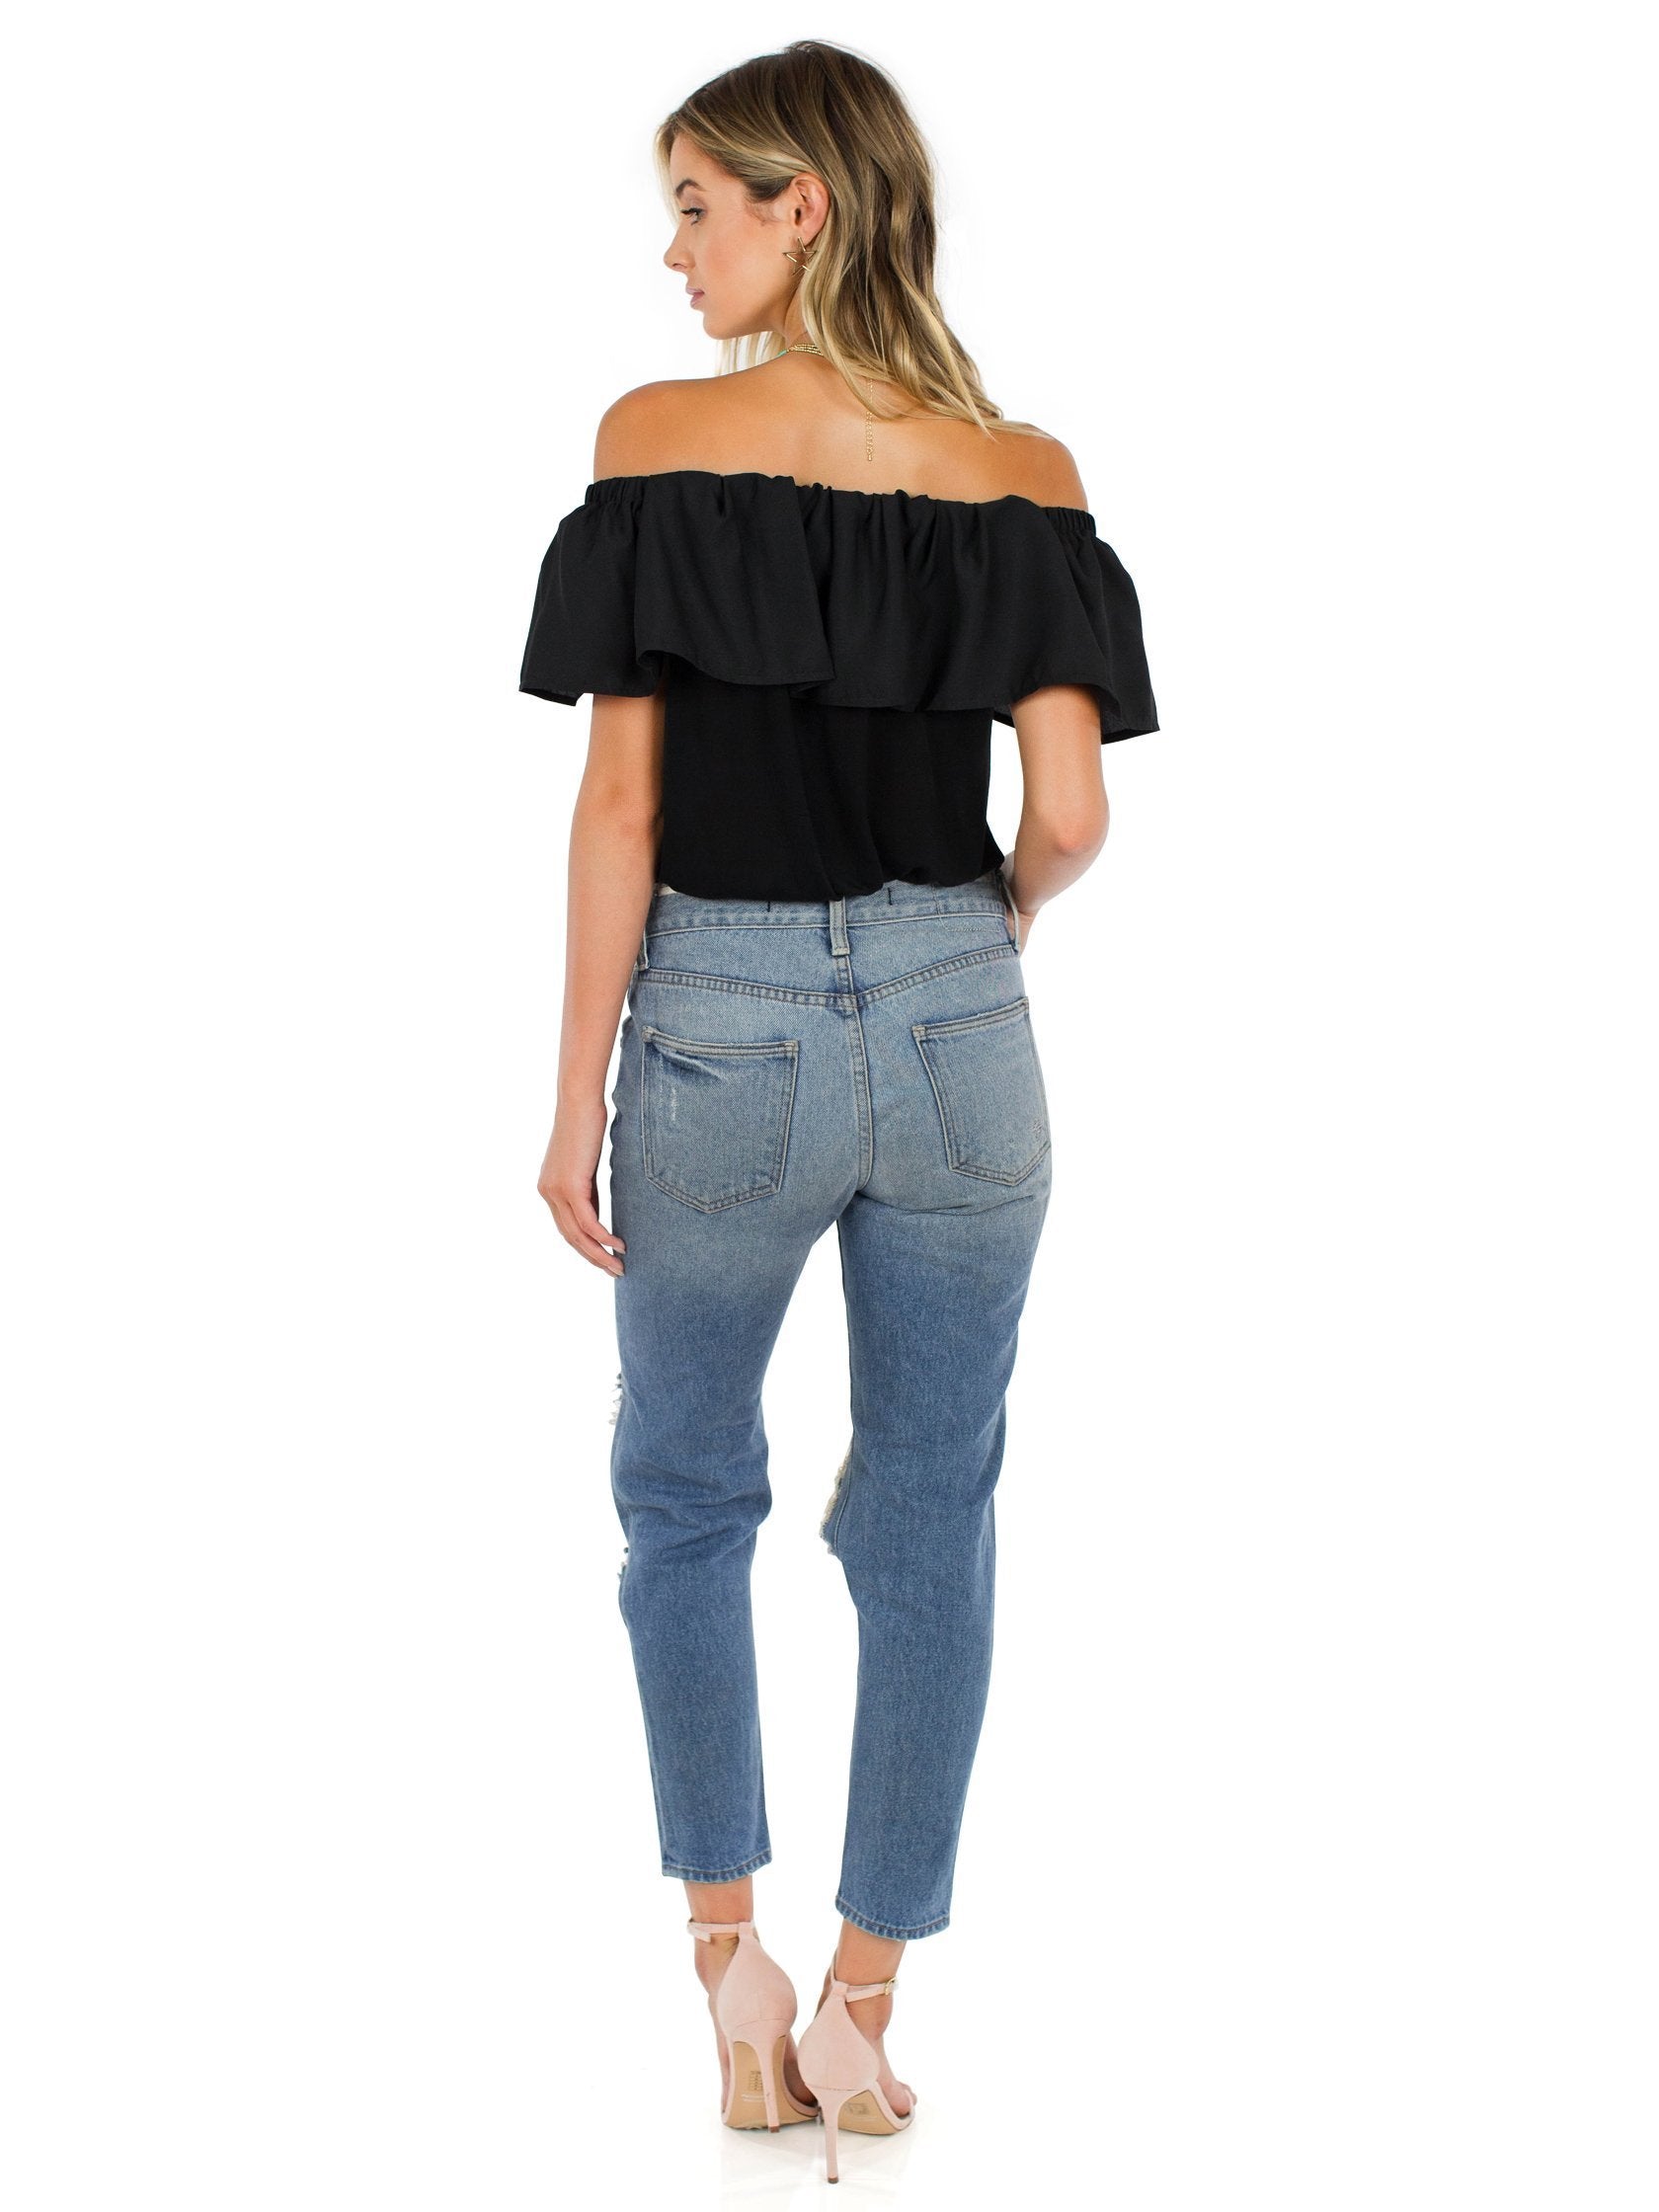 Girl wearing a top rental from French Connection called Polly Plains Off-the-shoulder Top